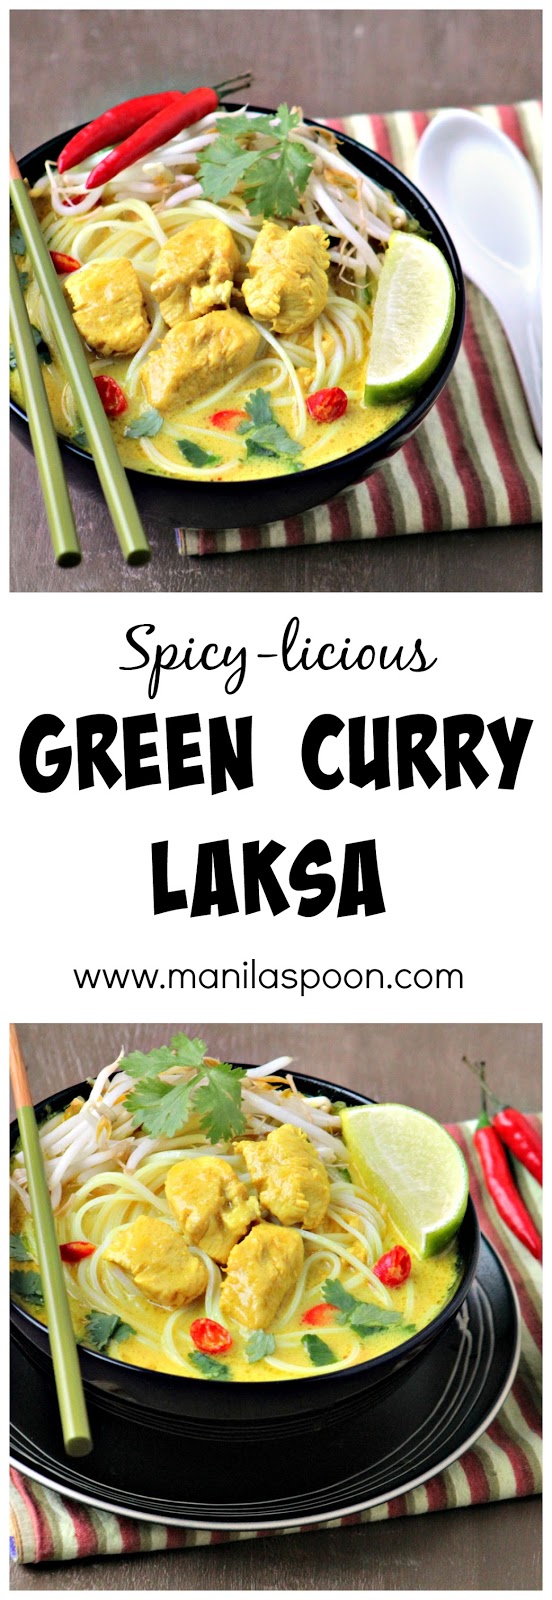 Creamy, sweet, spicy, tangy - this Green Curry Laksa is loaded with delicious flavors! Dairy-free and gluten-free, too!